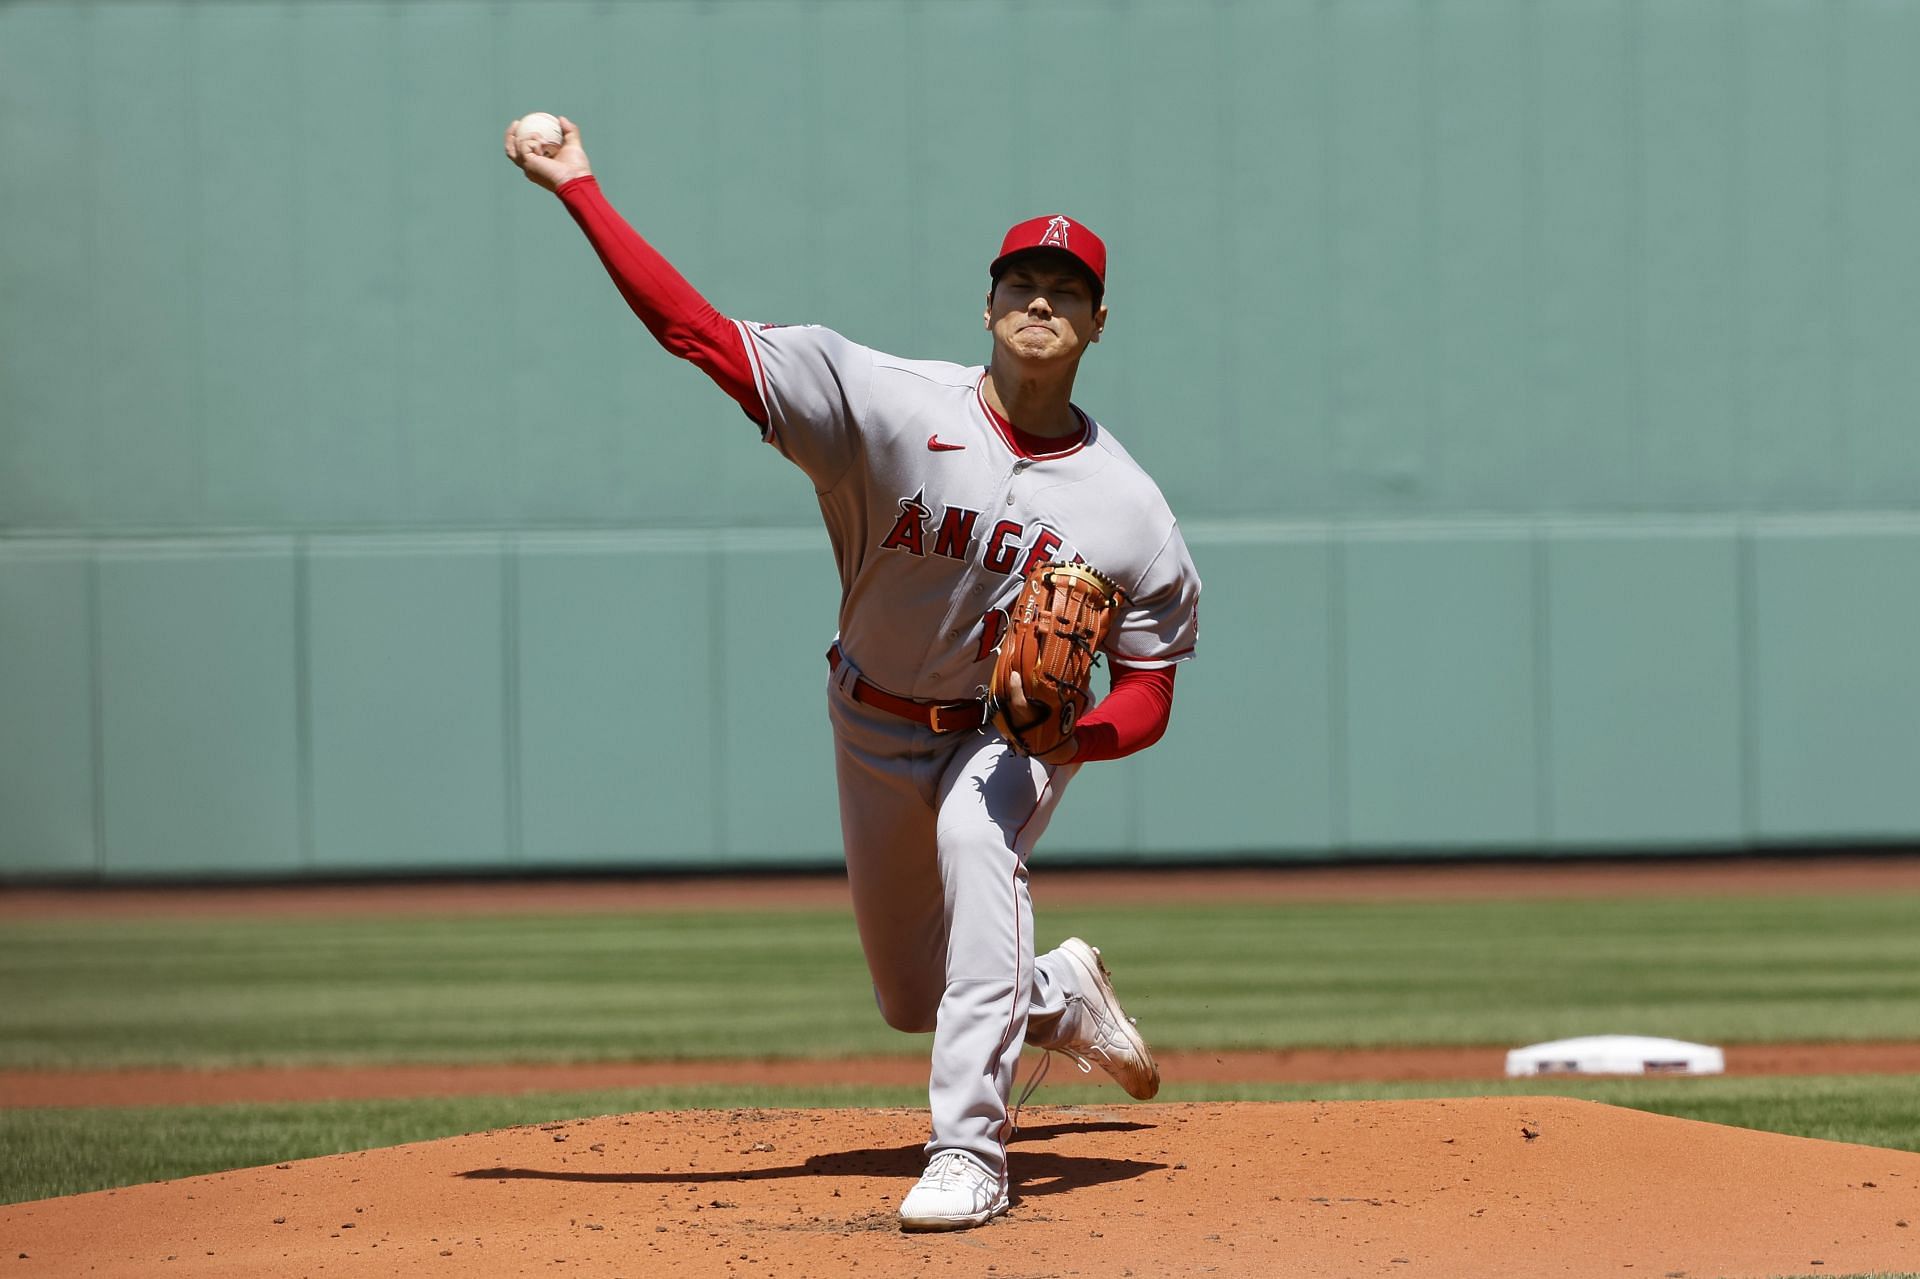 Shohei Ohtani of the Los Angeles Angels pitches against the Boston Red Sox.